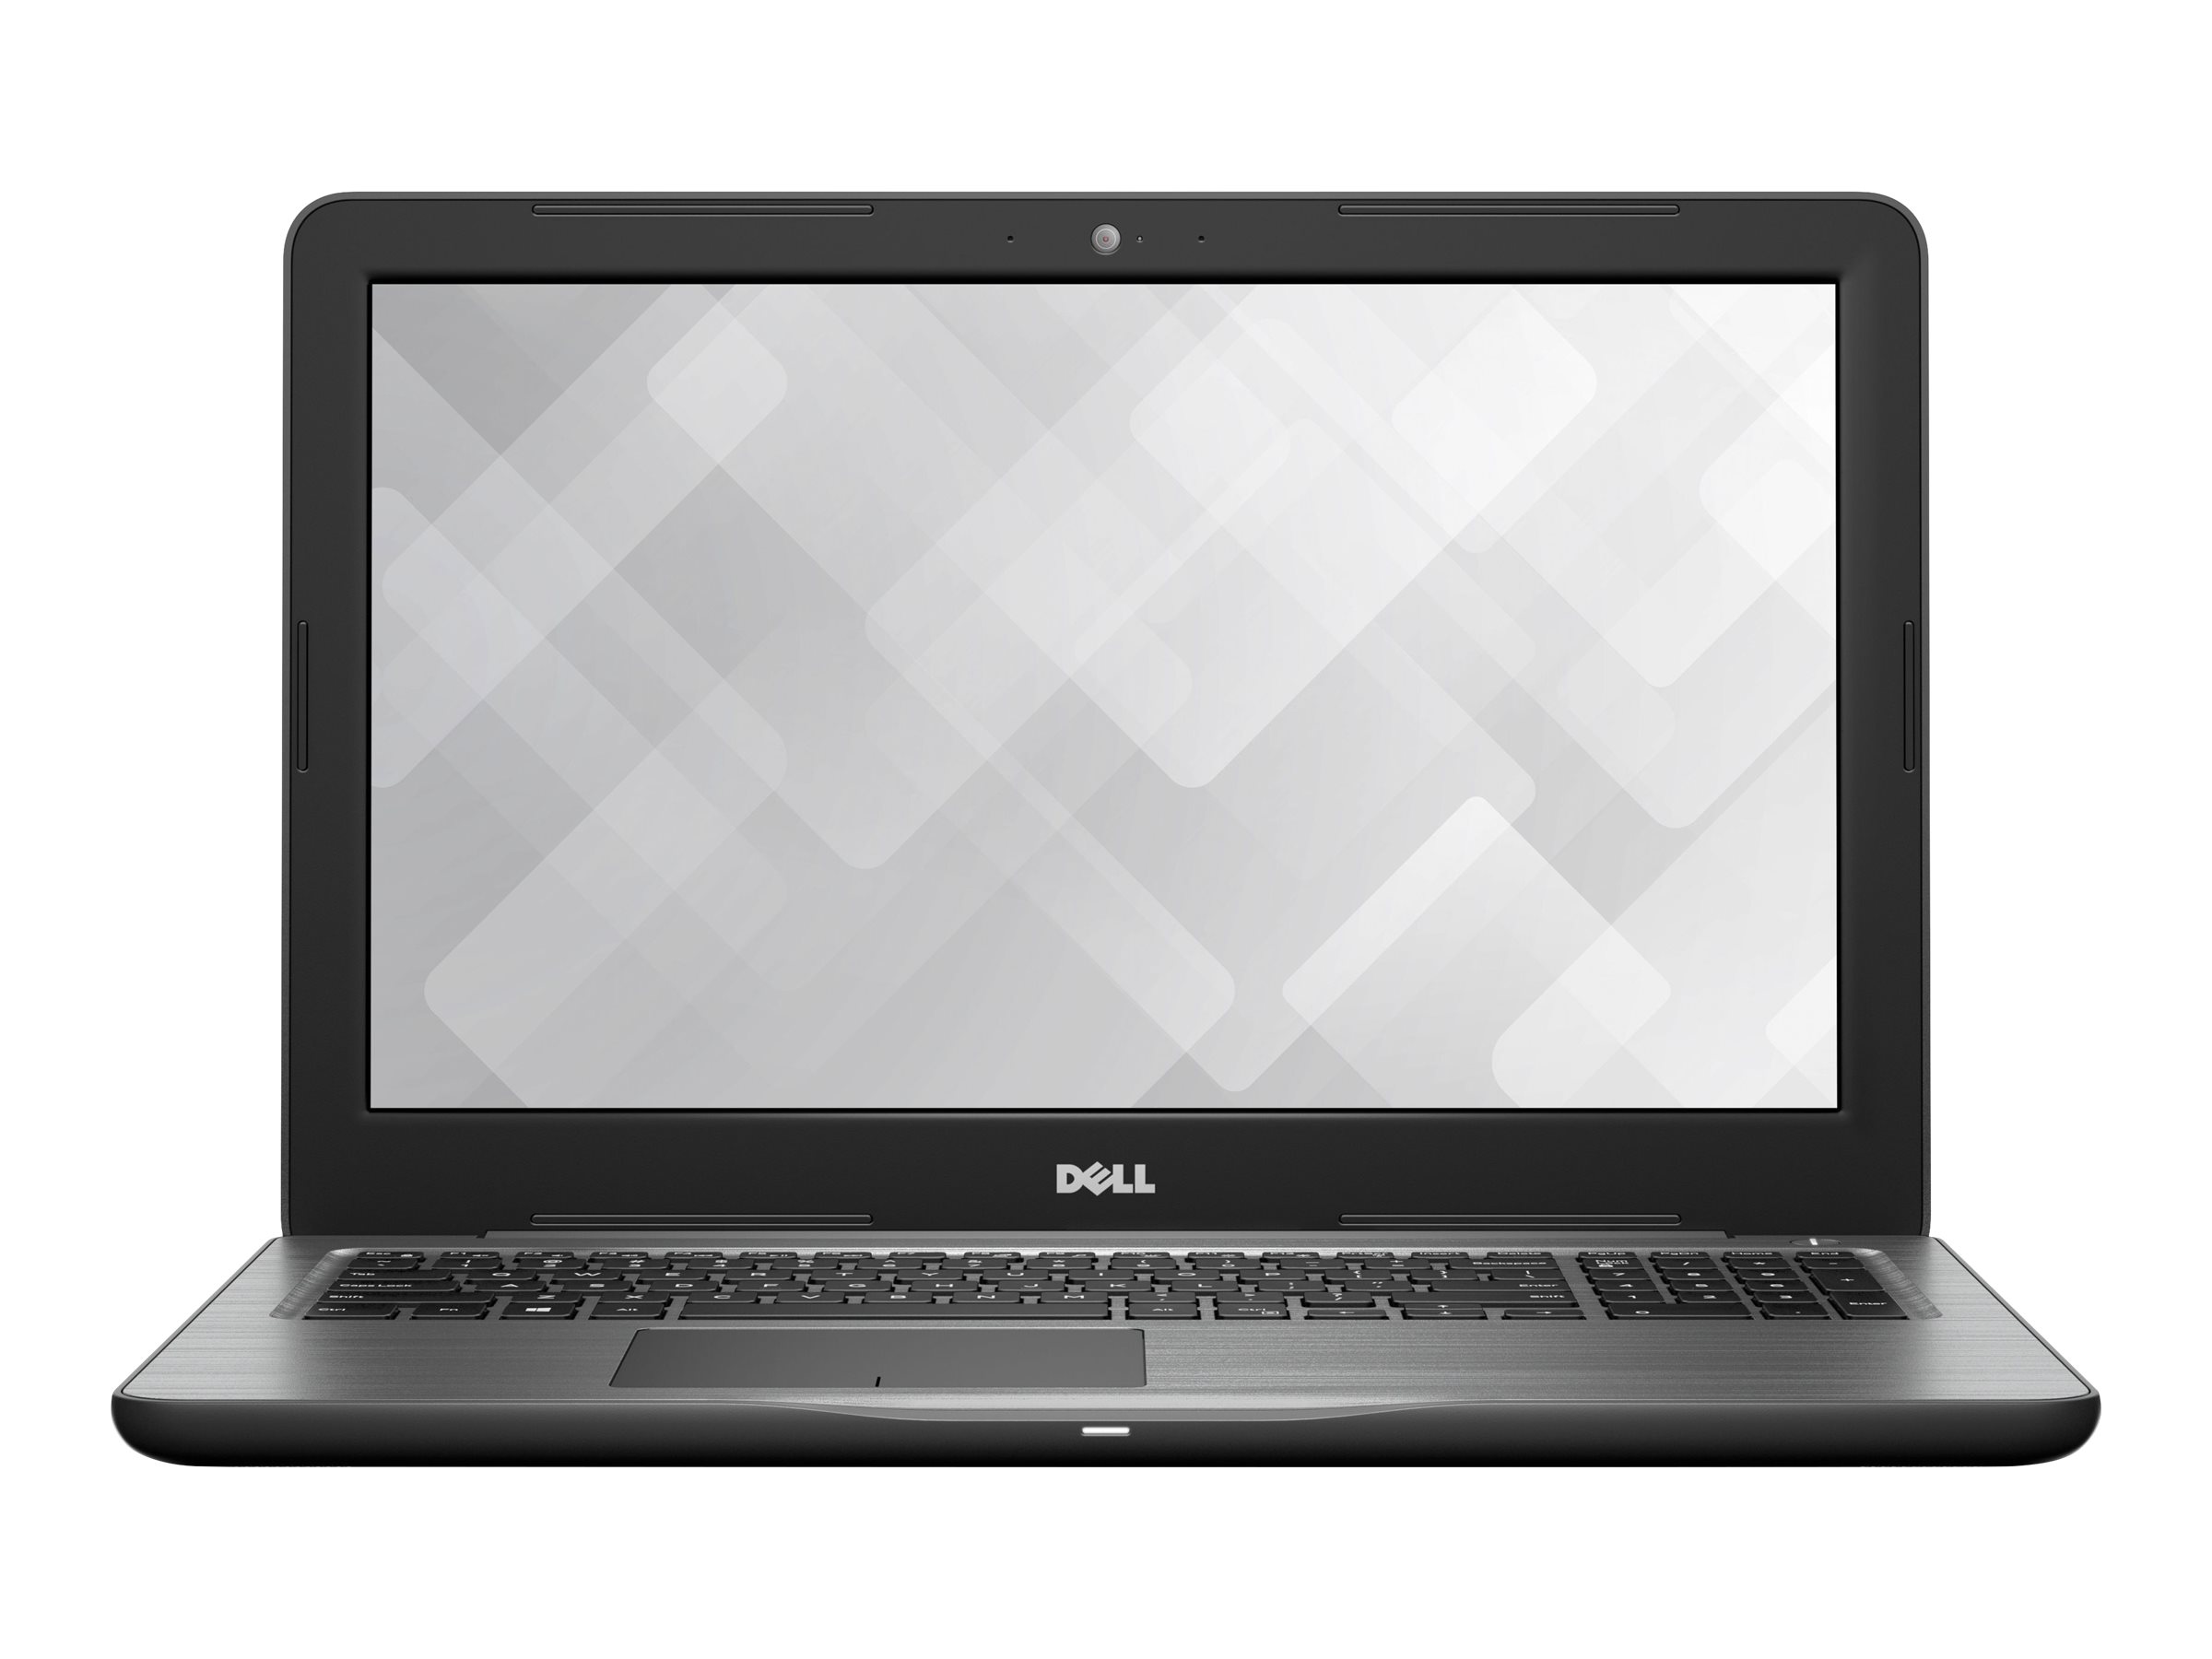 Dell Inspiron 13 5378 2-in-1 - full specs, details and review